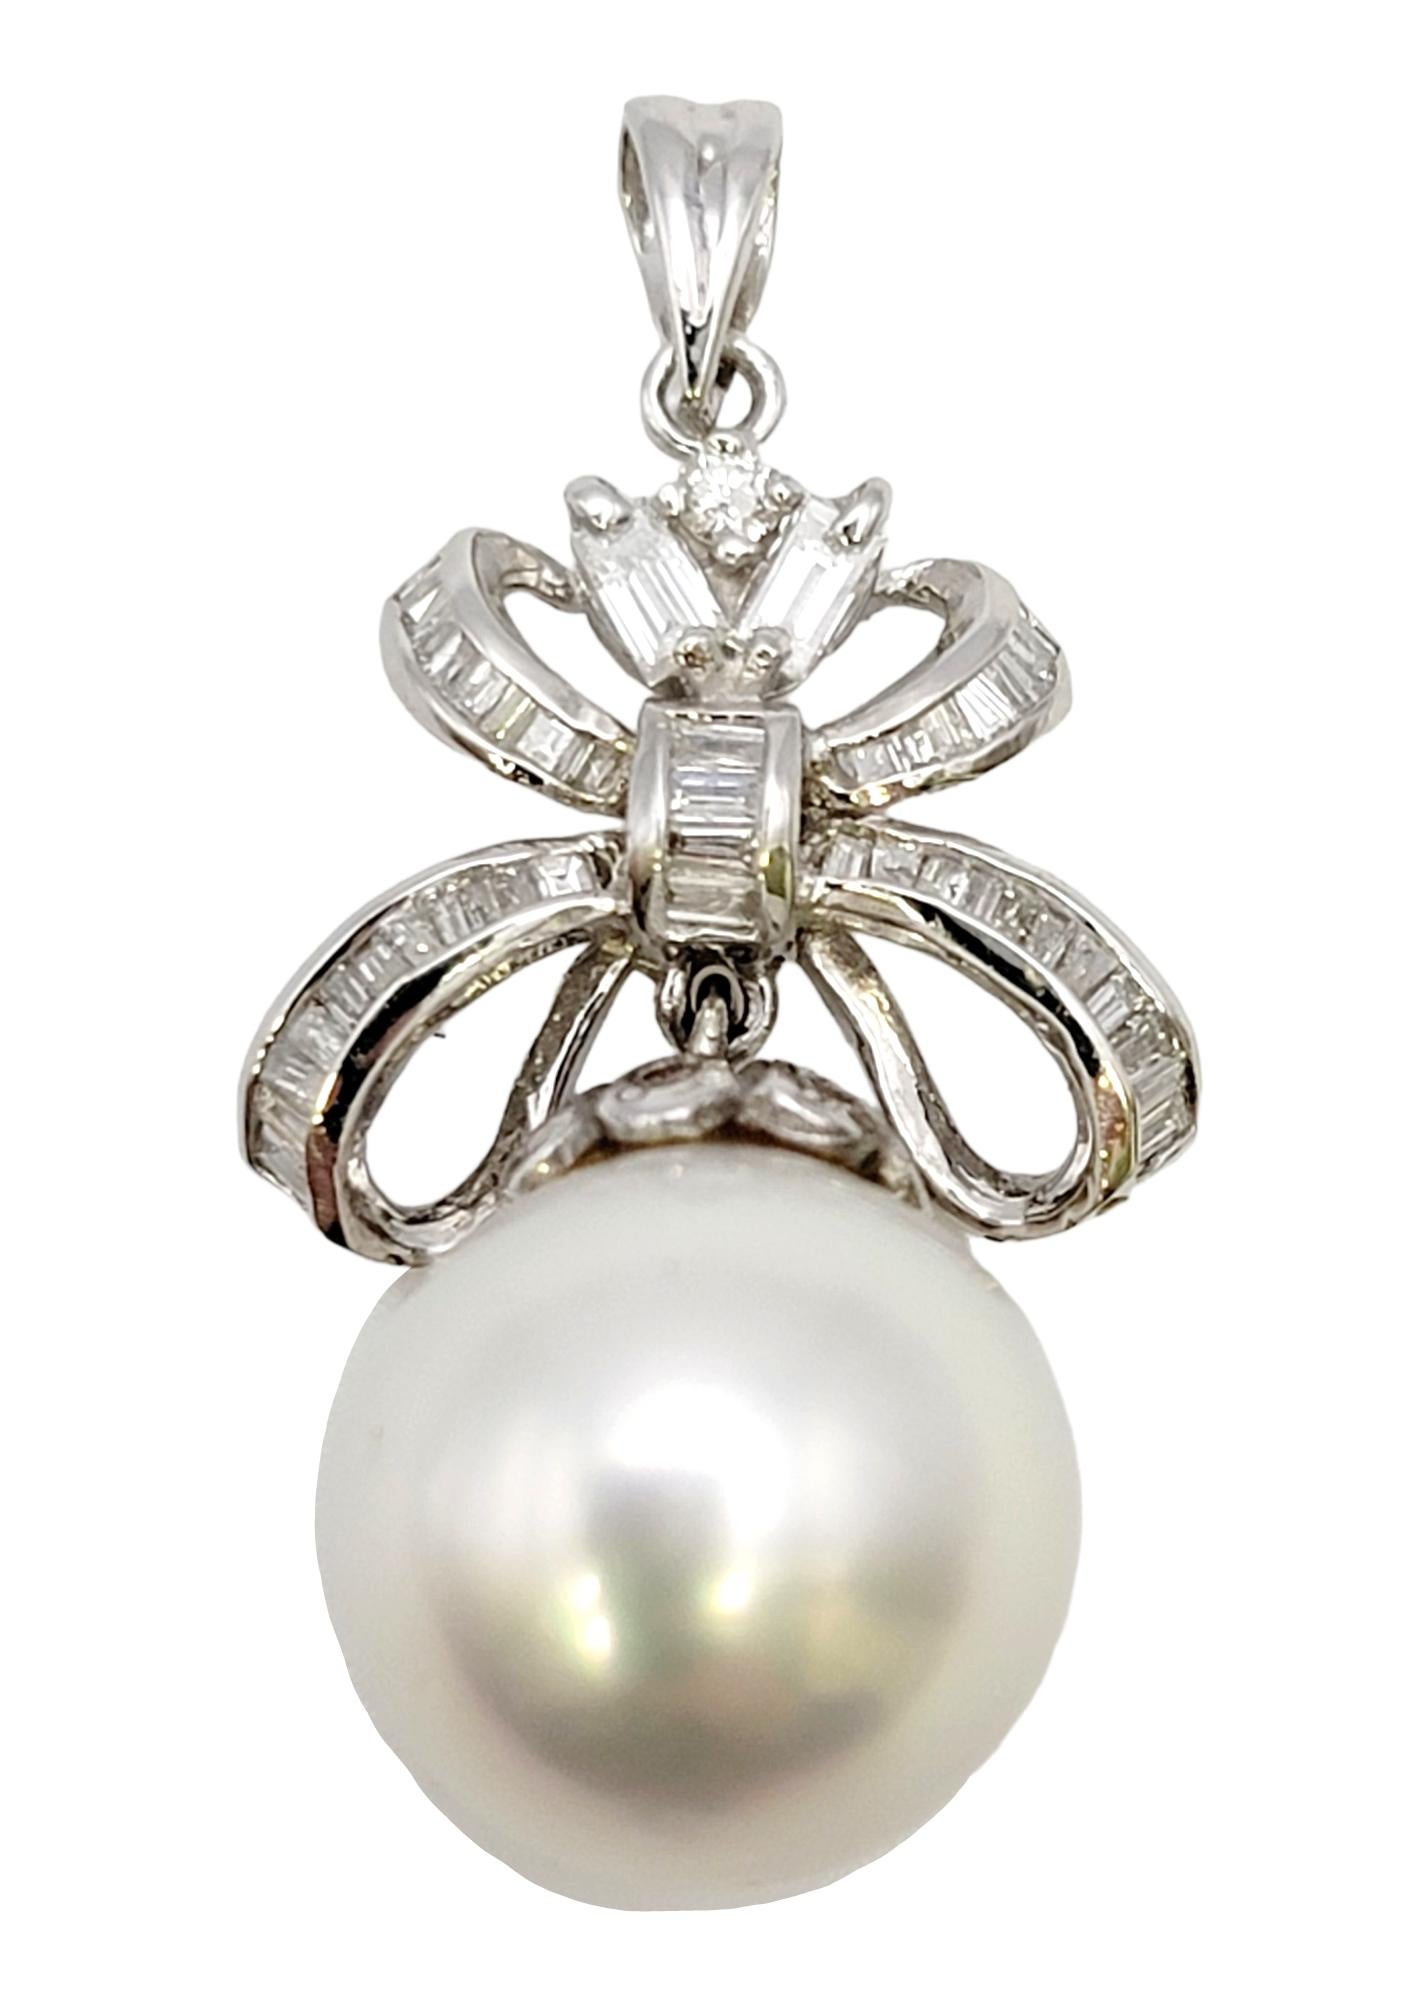 It doesn't get more classic than the elegant combination of diamonds and pearls and this piece certainly does not disappoint! This beautiful pendant is truly a timeless beauty that you will cherish for years to come.

This stunning pendant offers